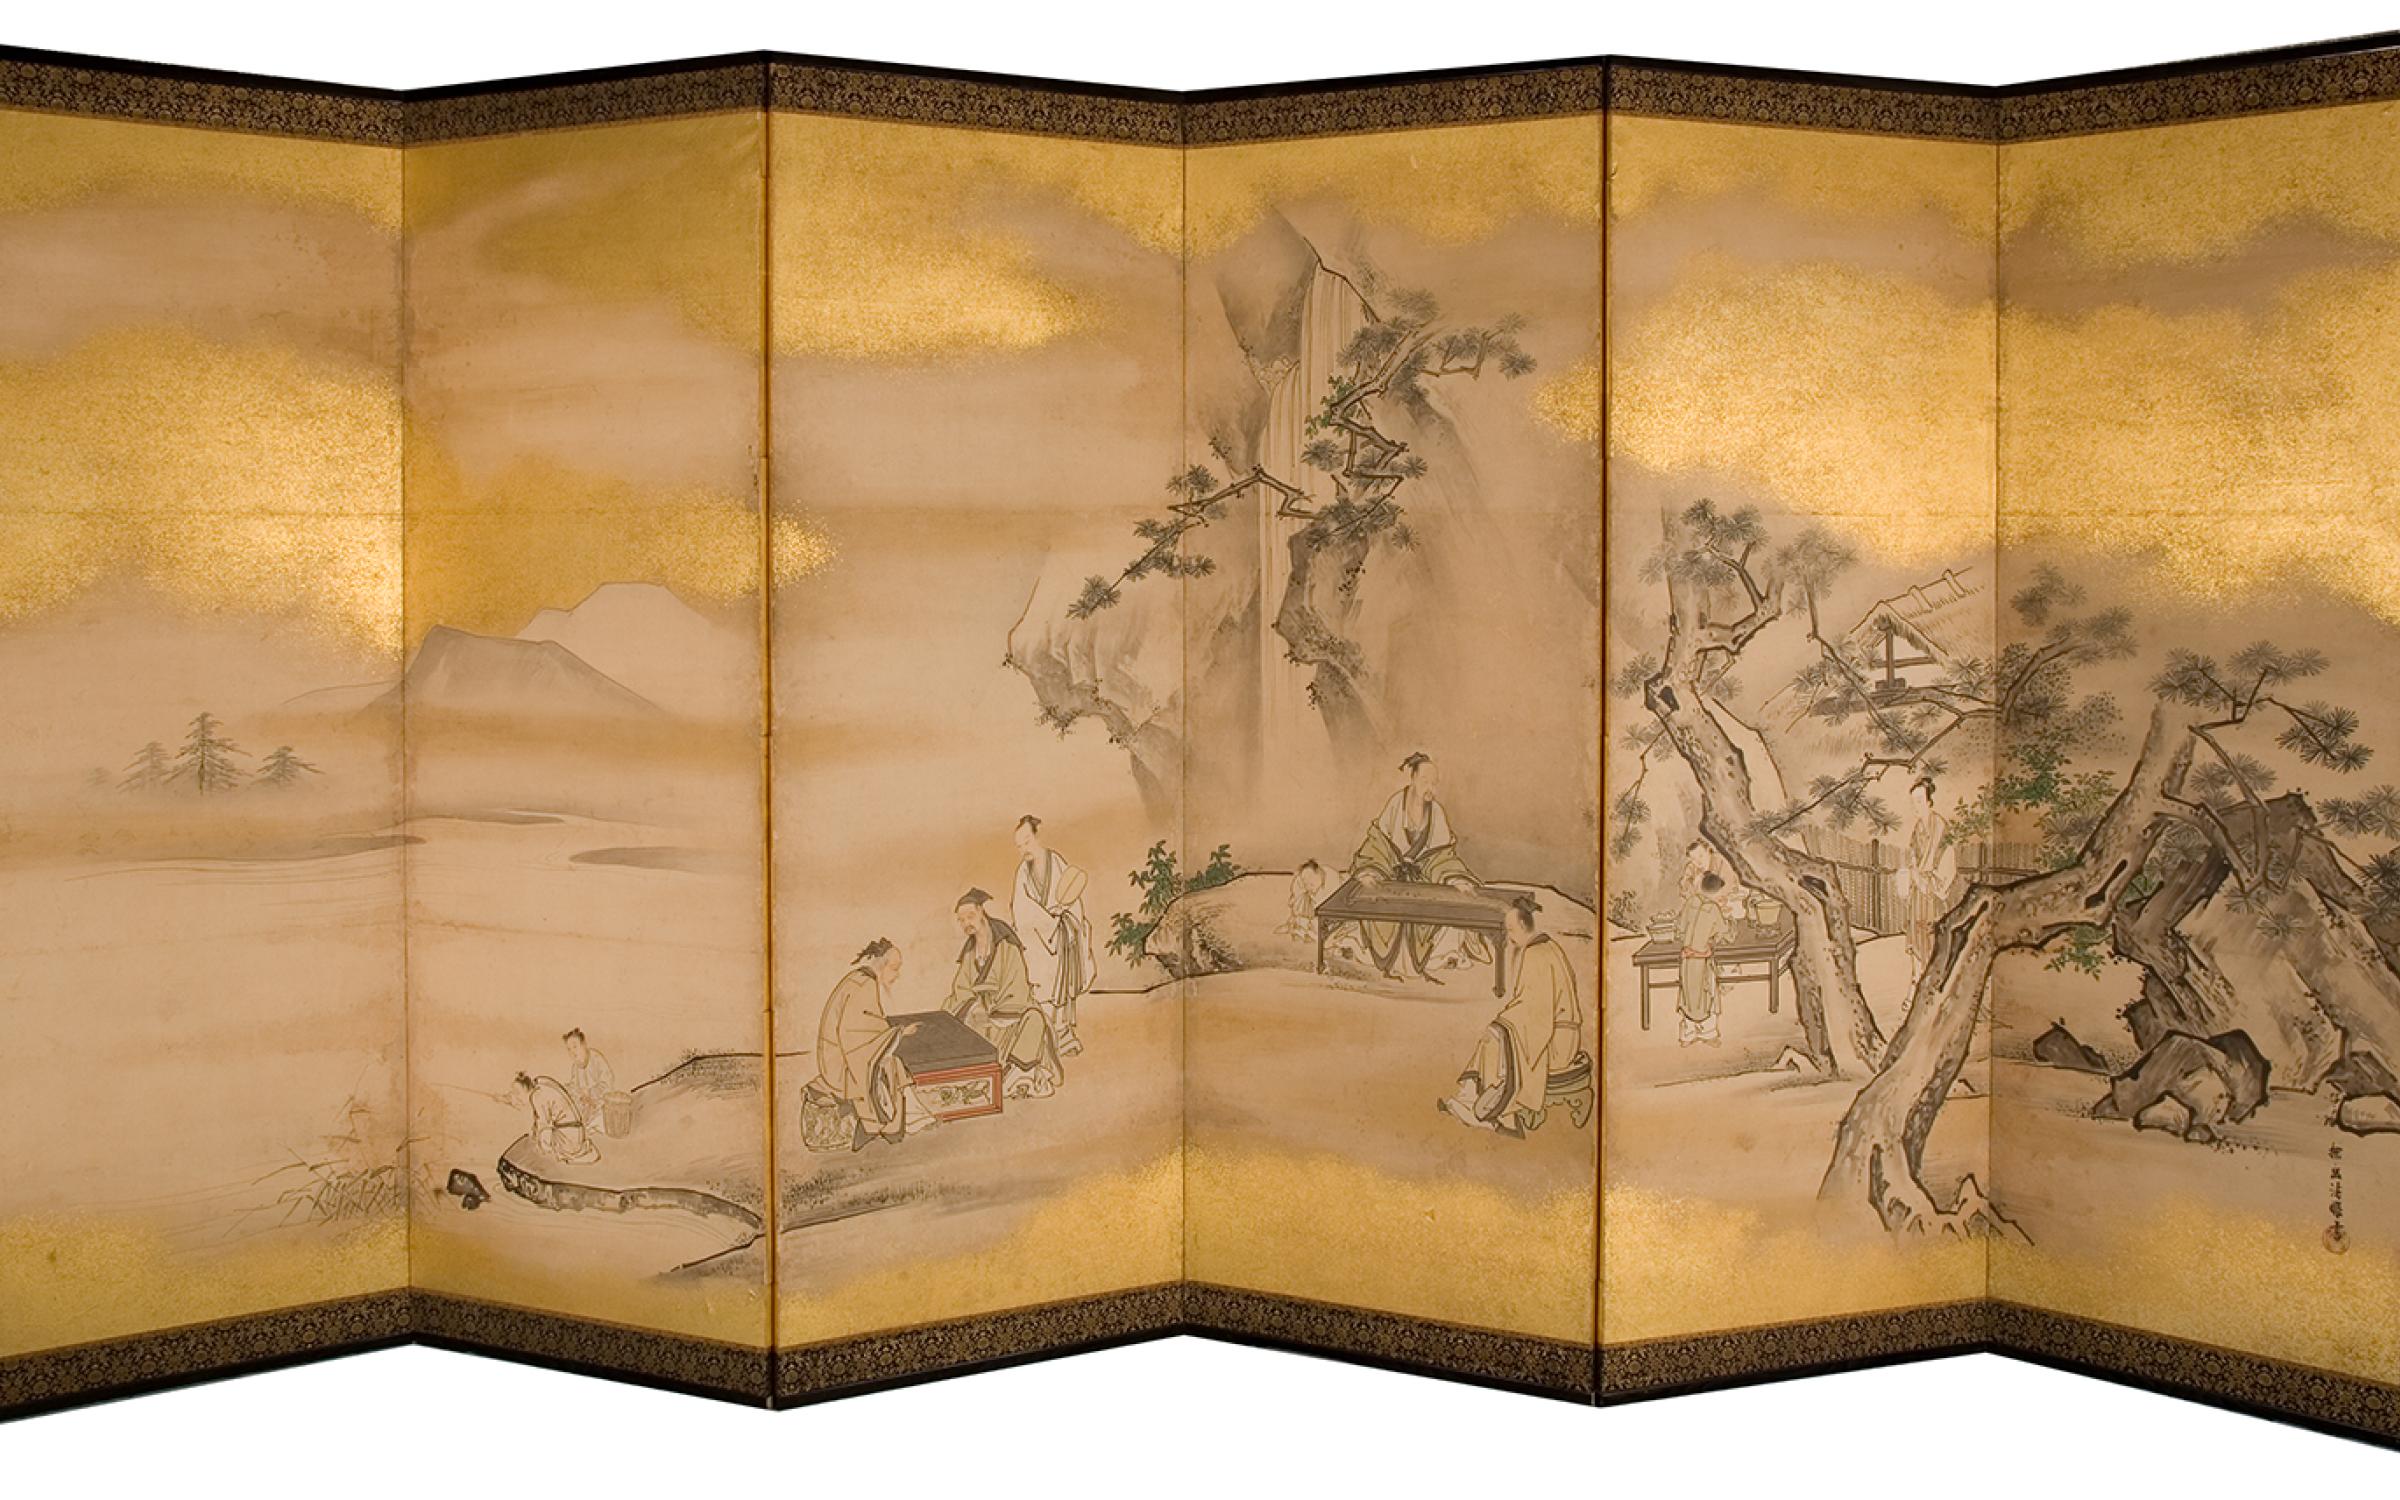 Kano Tanyu, Six-Panel Screen Depicting a Musician and Go Players, UMFA1999.38.6 